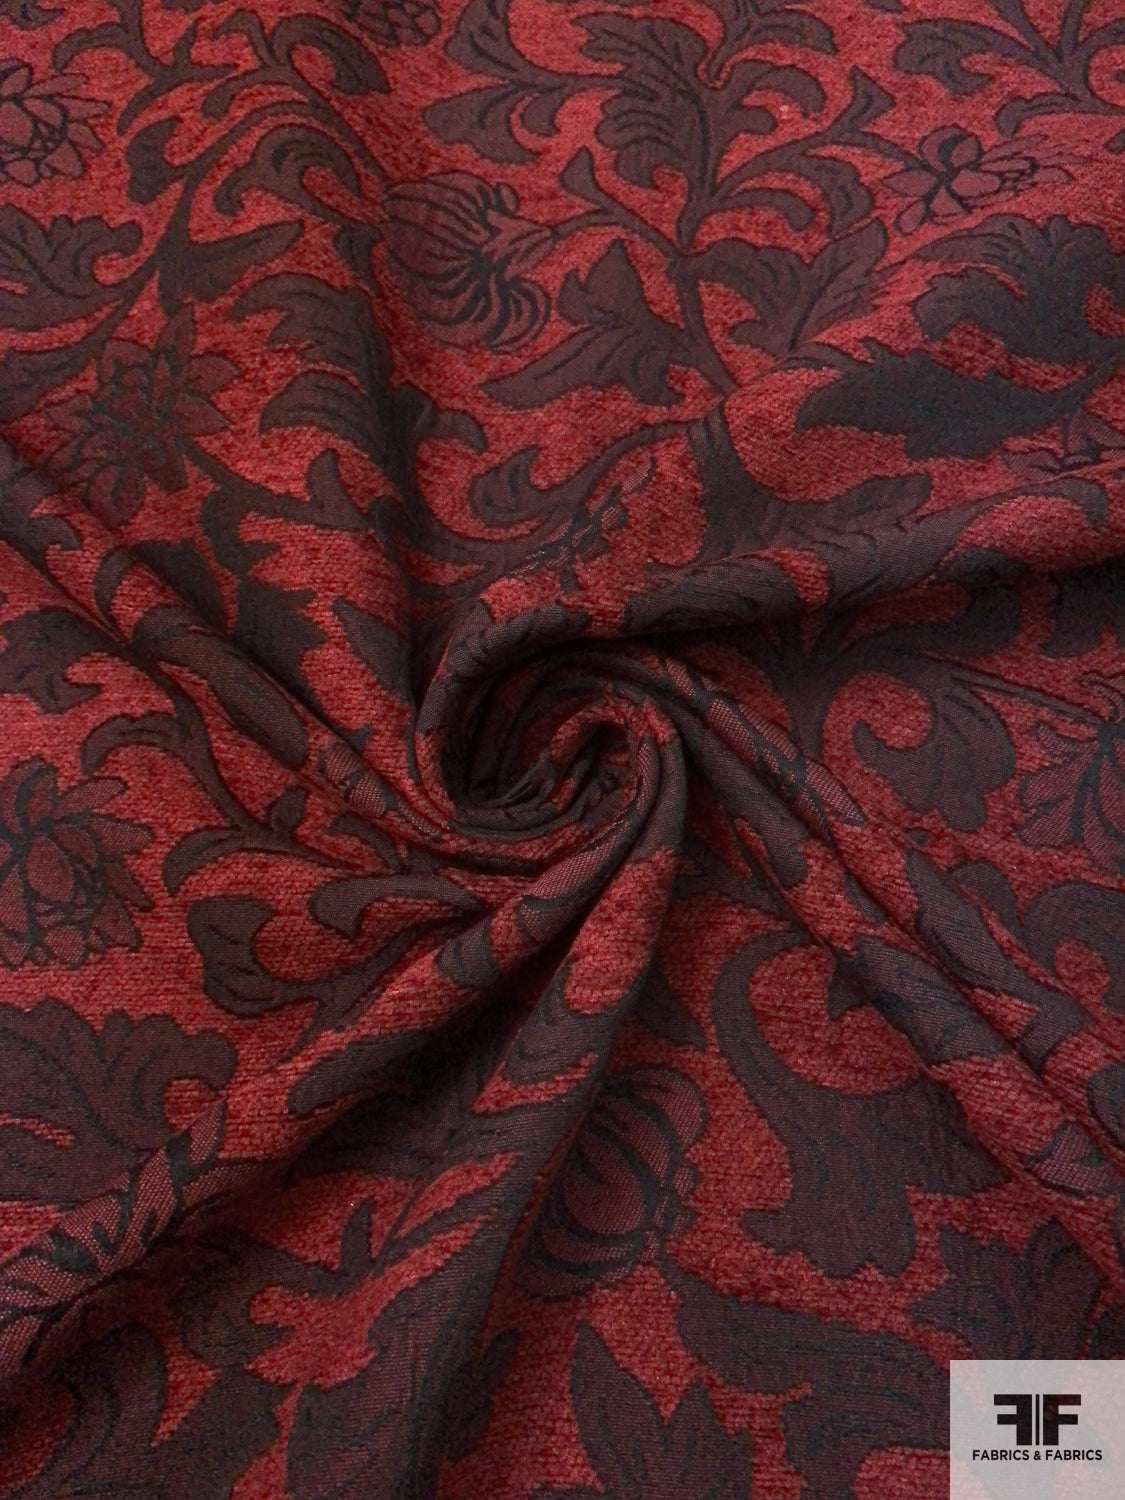 Damask Tapestry-Look Brocade - Black / Grey - Fabric by the Yard